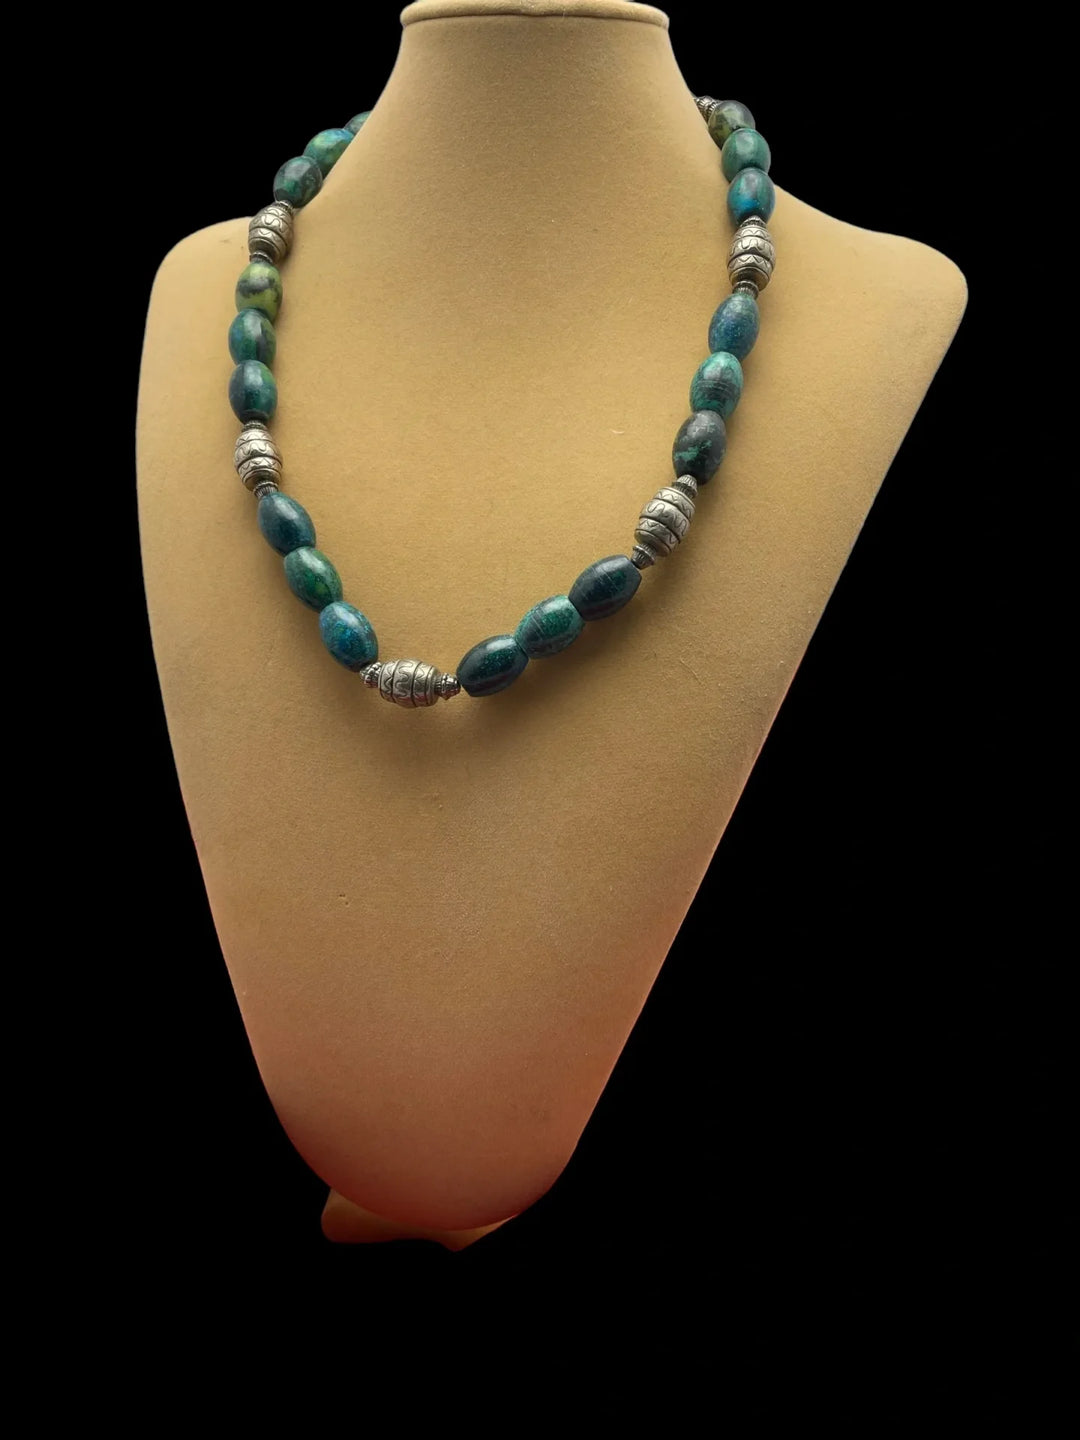 Blue/Green Turquoise Necklace